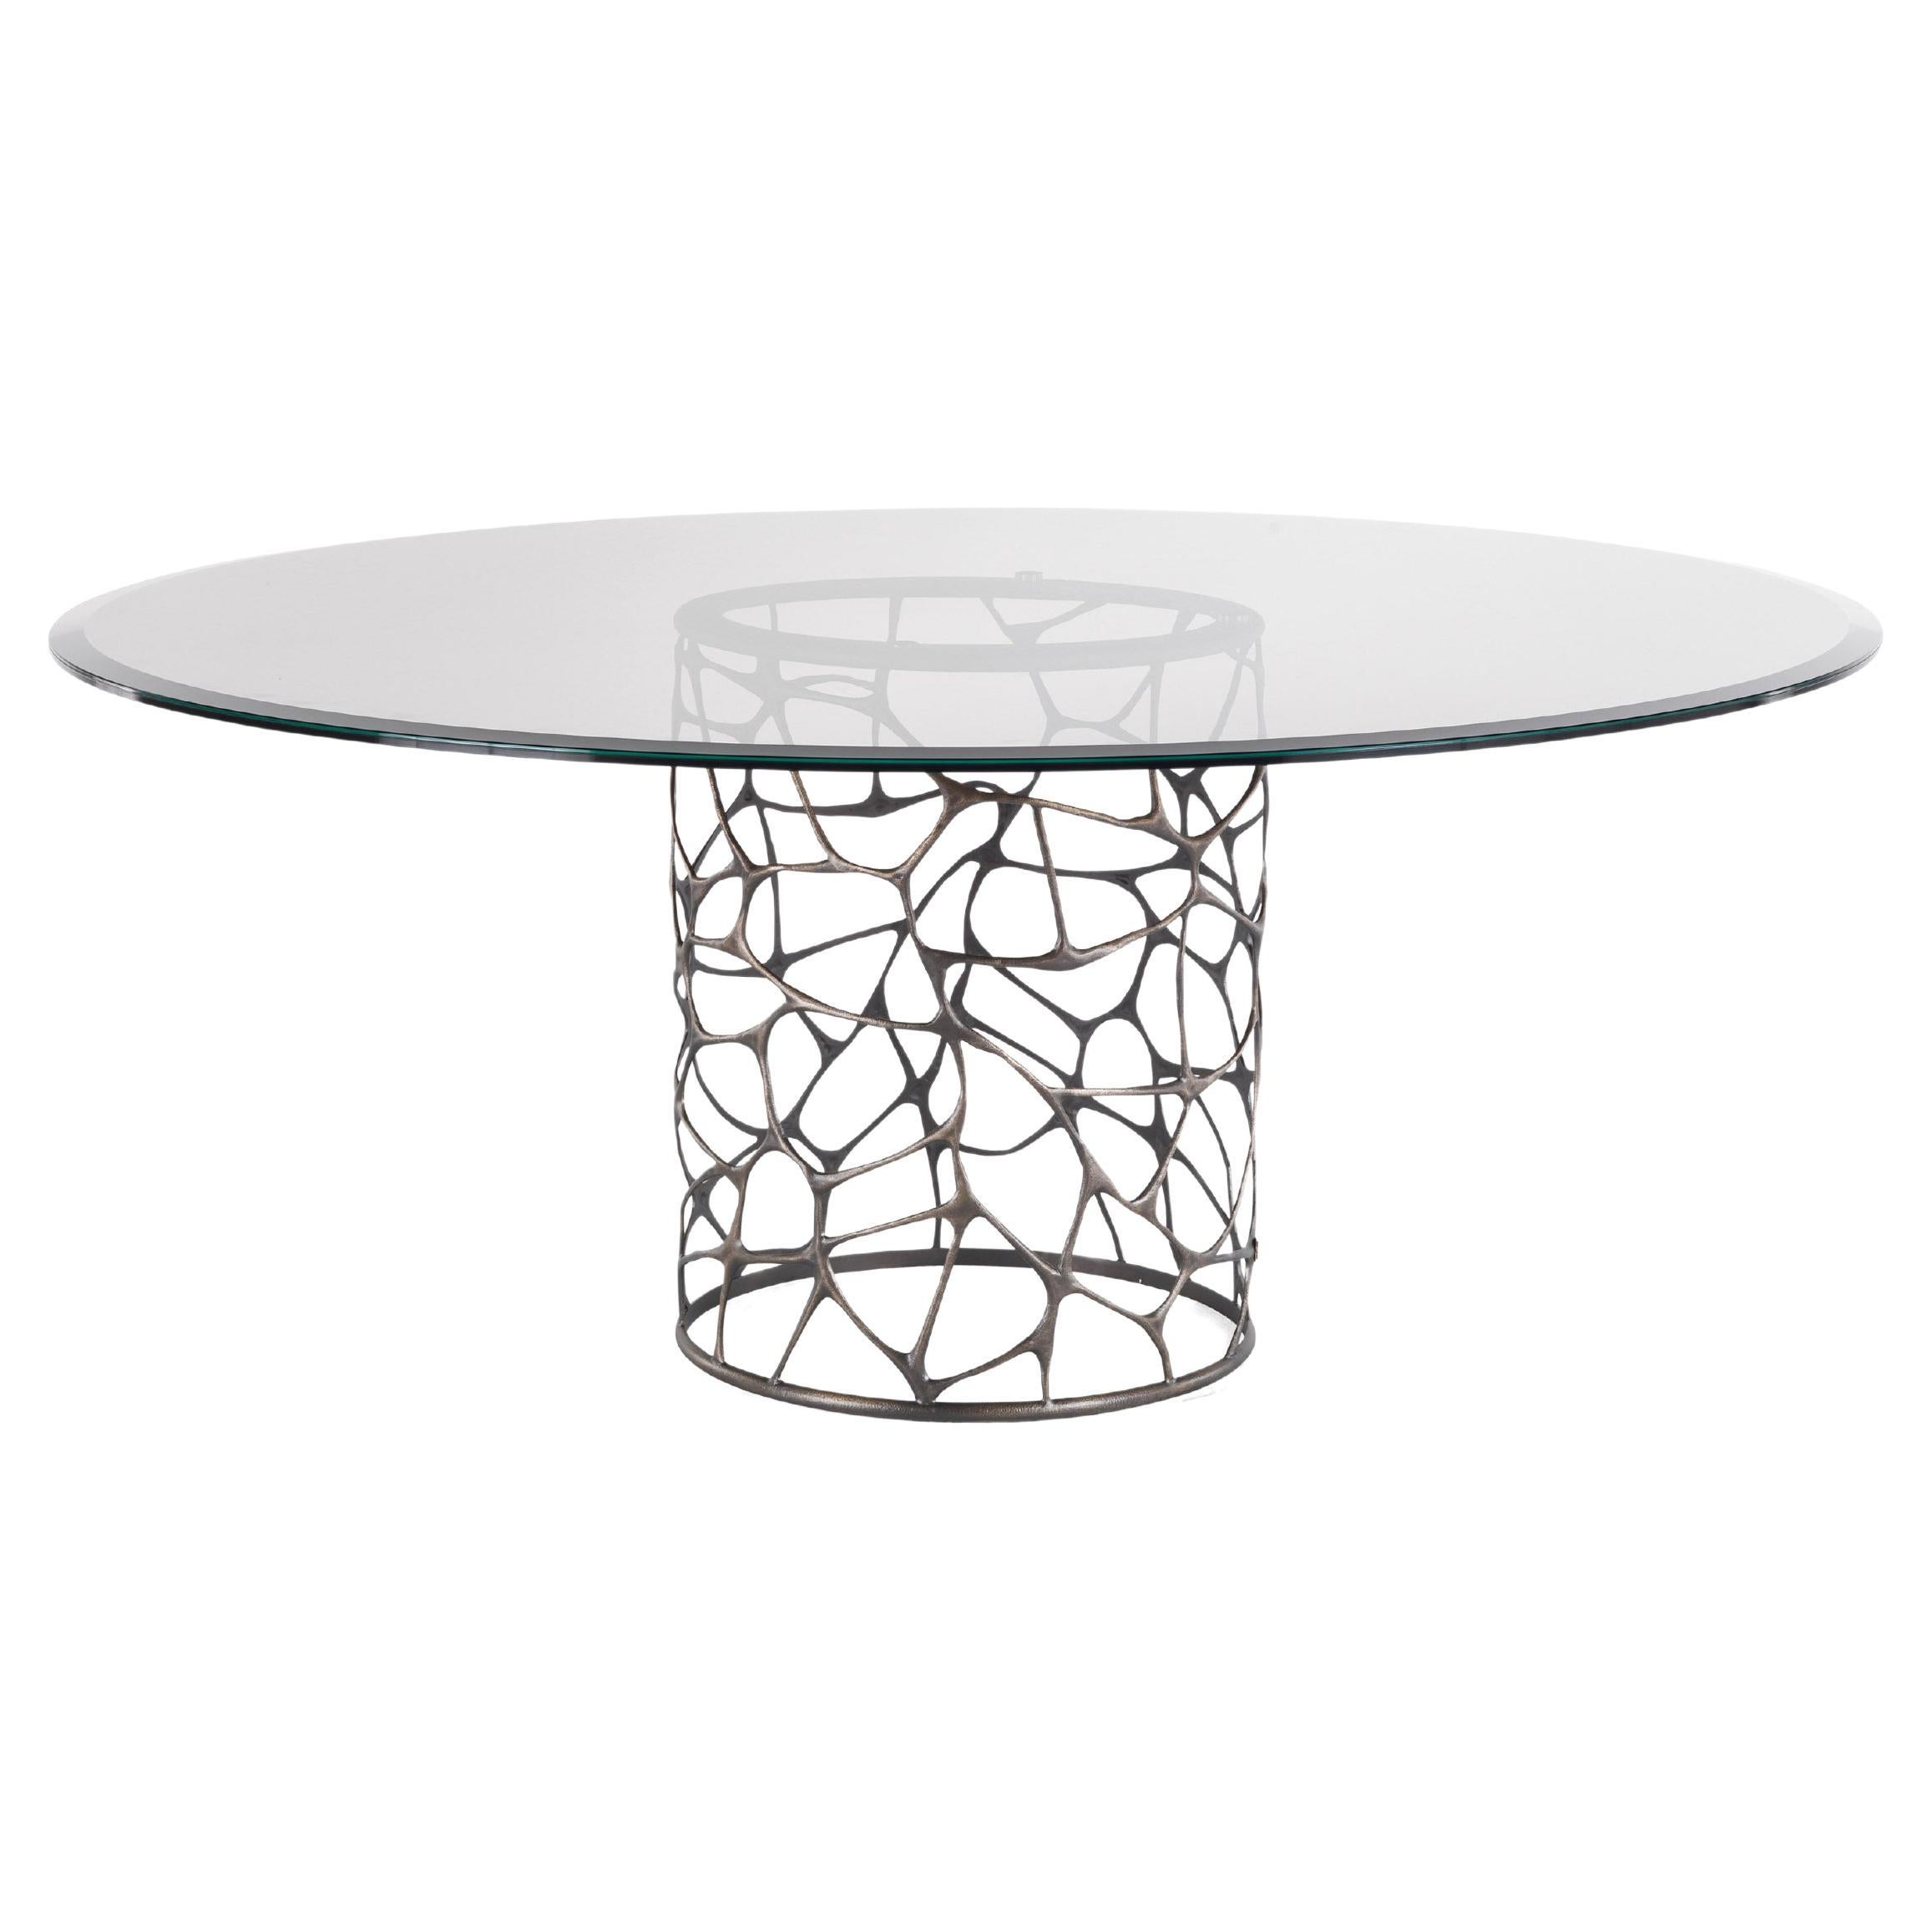 21st Century Sioraf Dining Table in Metal by Roberto Cavalli Home Interiors For Sale